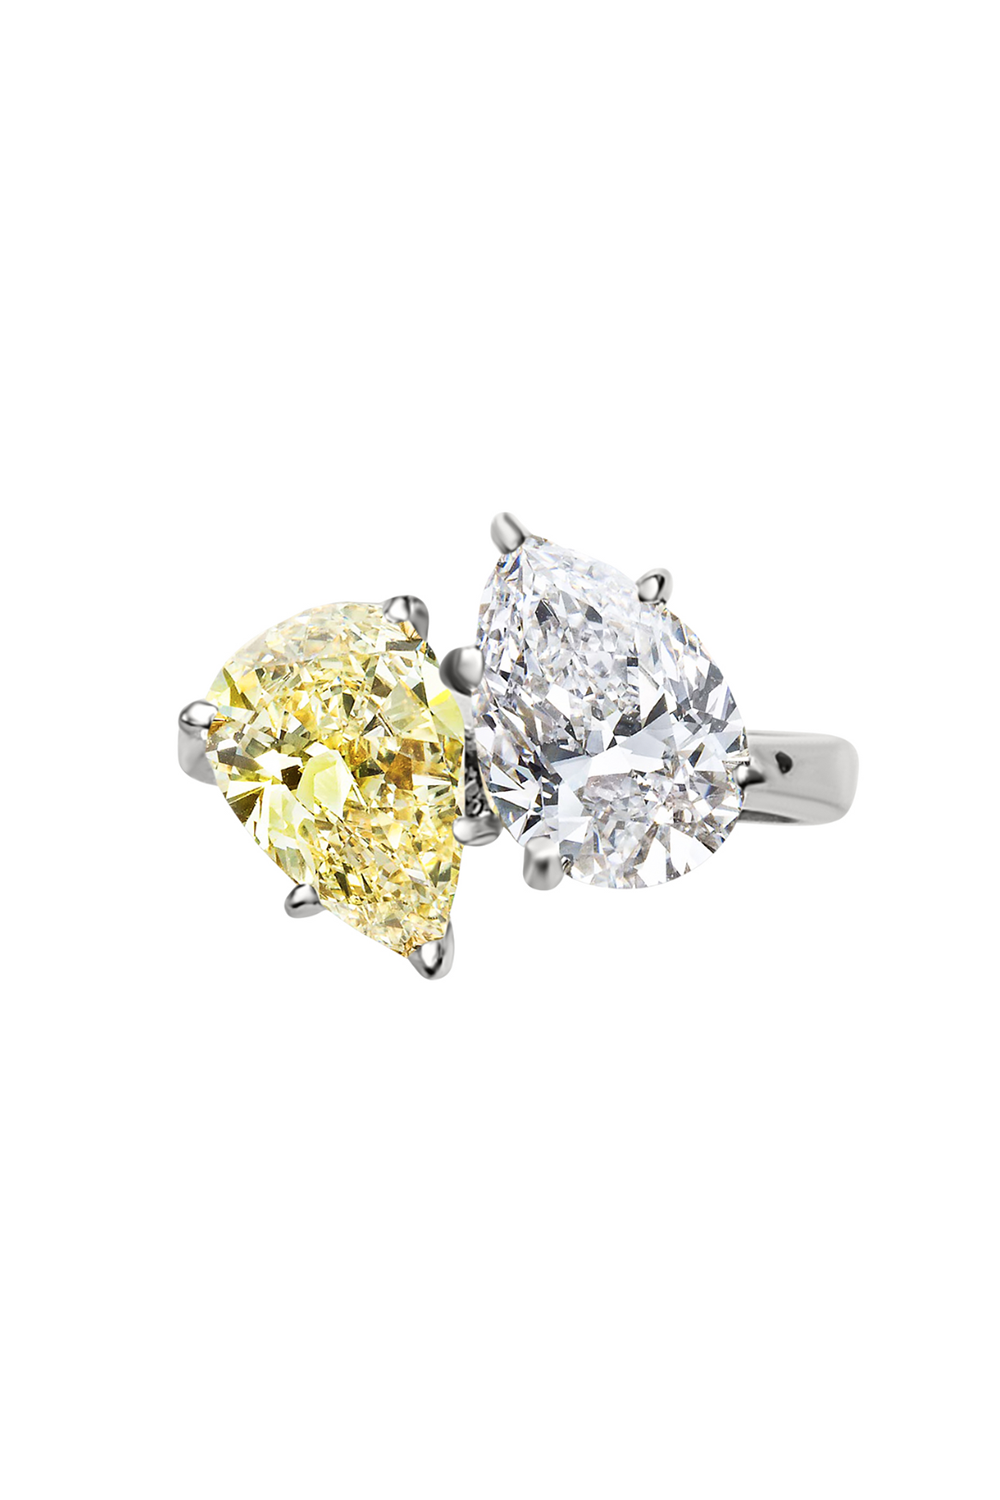 Canary Pear Cut Ring JEWELRYBOUTIQUERING FANTASIA by DESERIO   